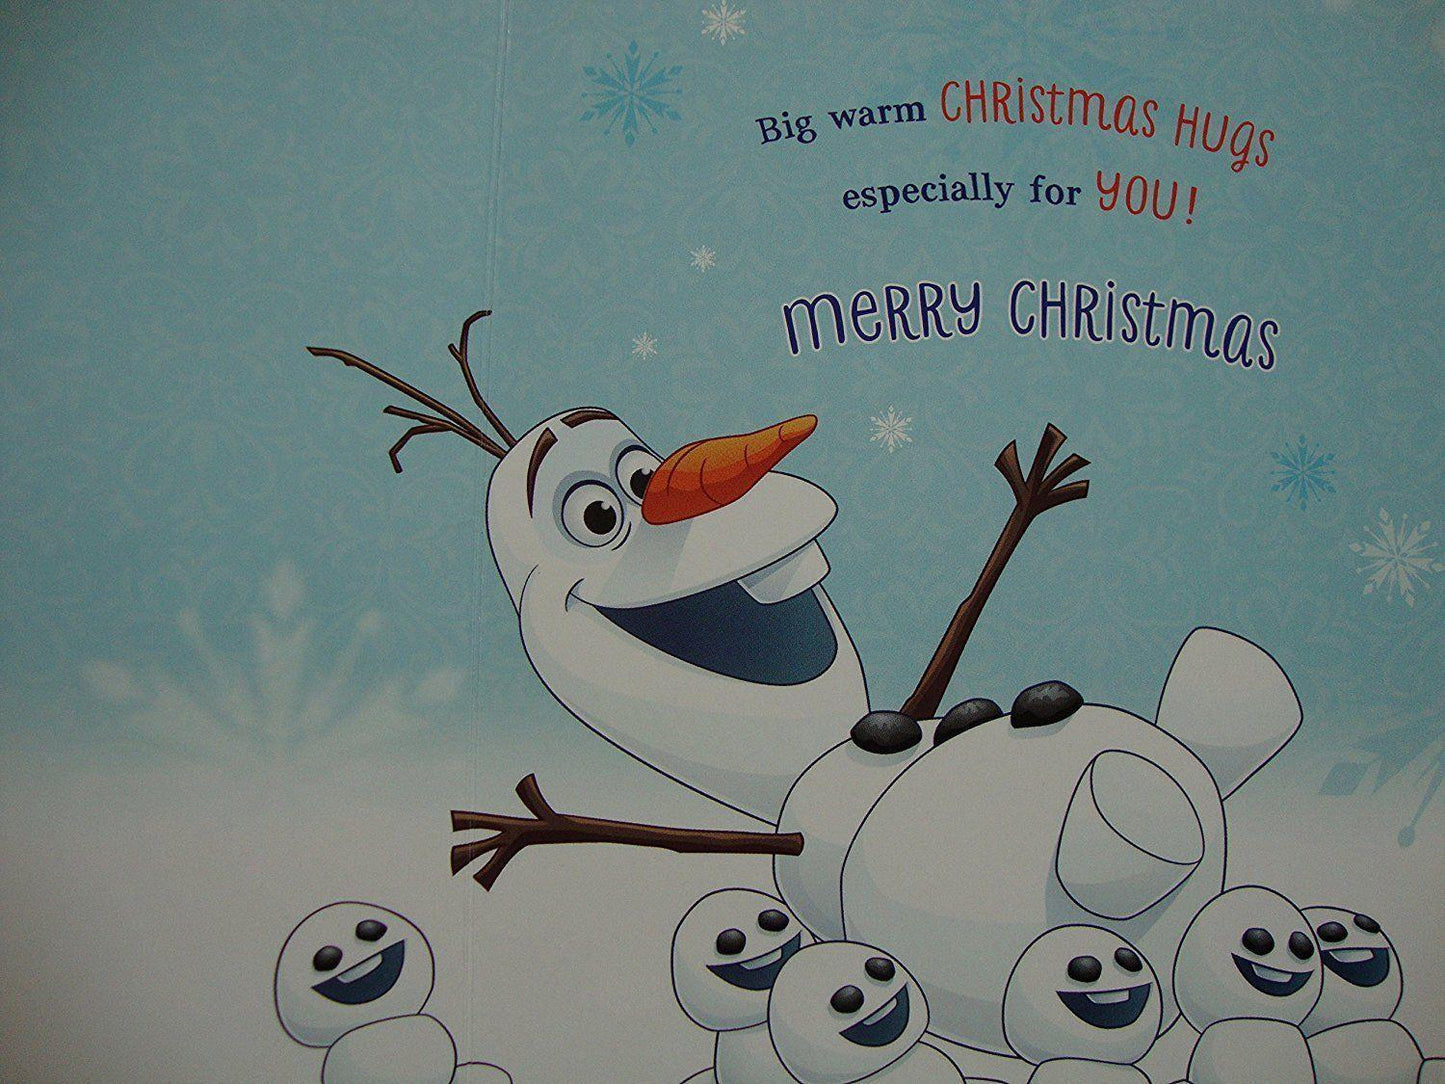 For My Perfect Daddy Frozen Olaf Christmas Card 